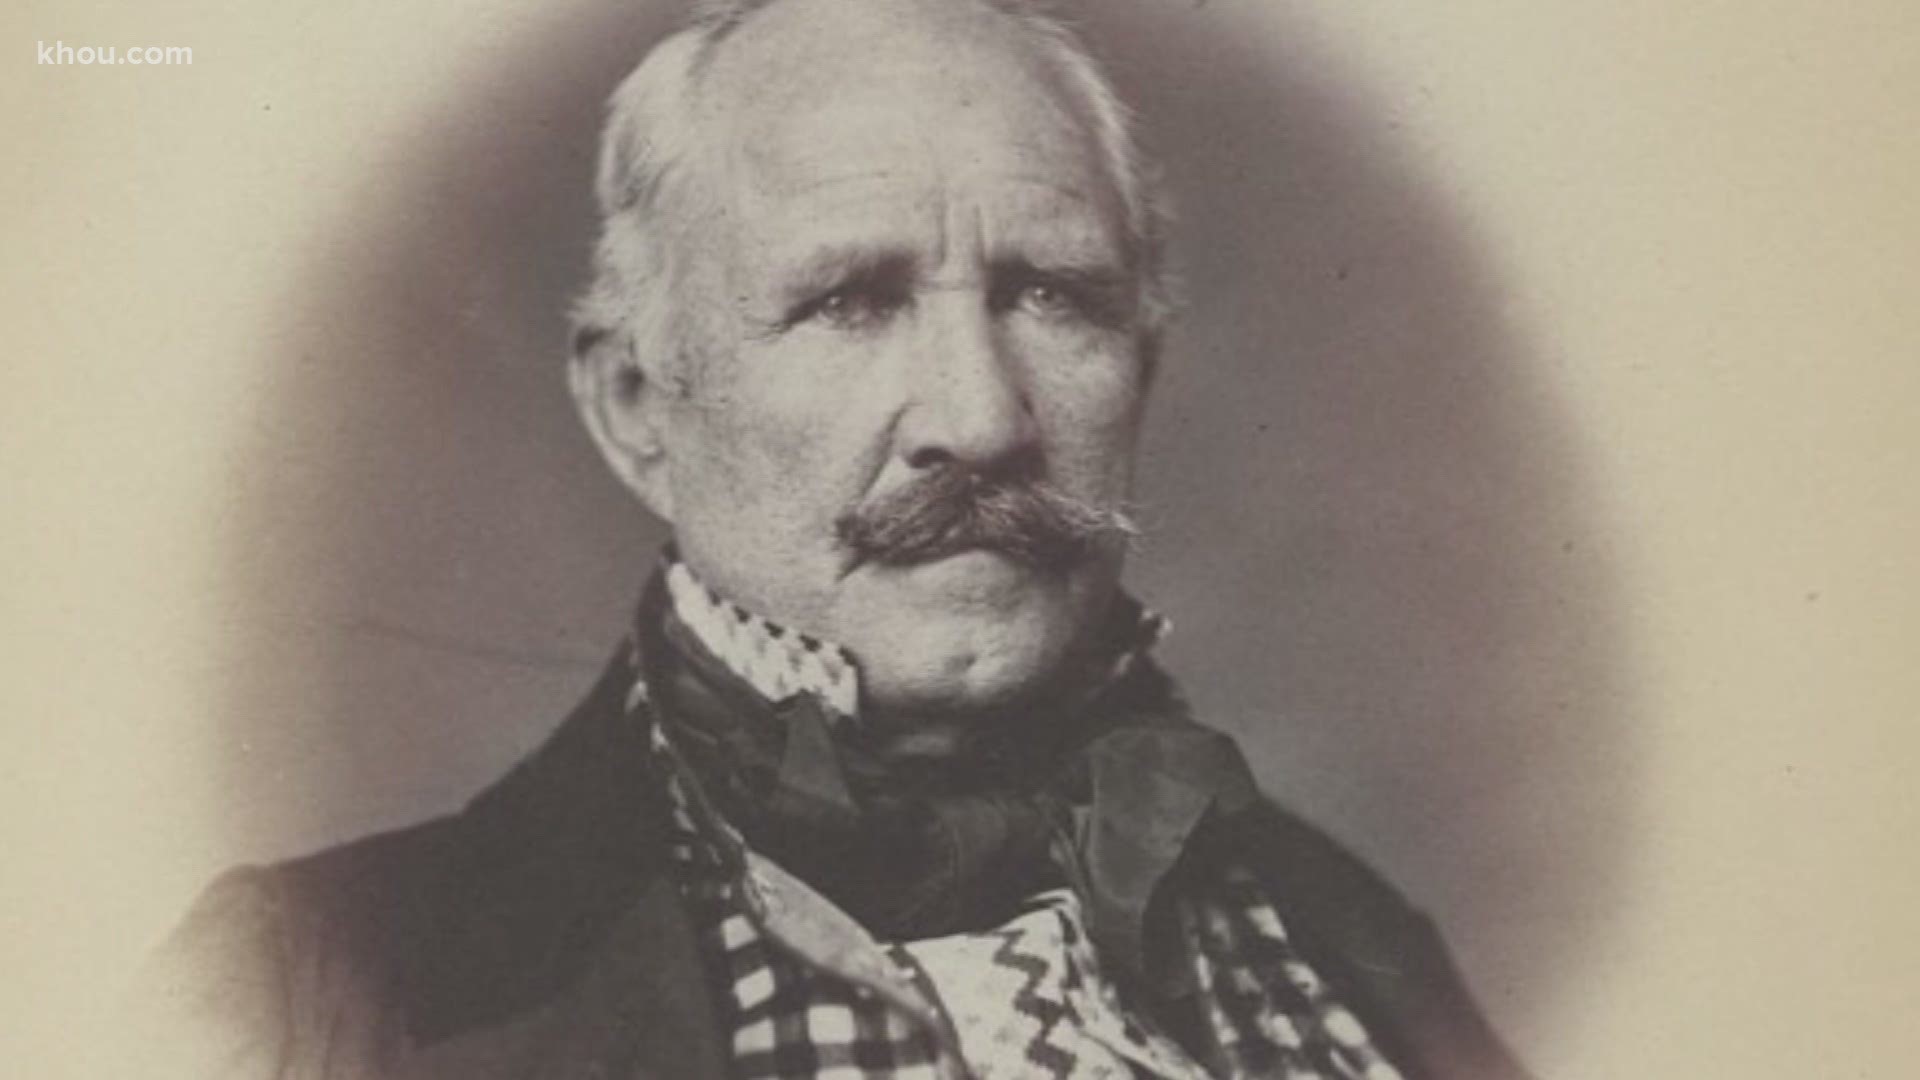 Did you know Sam Houston had a close relationship with the local Cherokee tribe? He even a certified citizen and had an adoptive family.